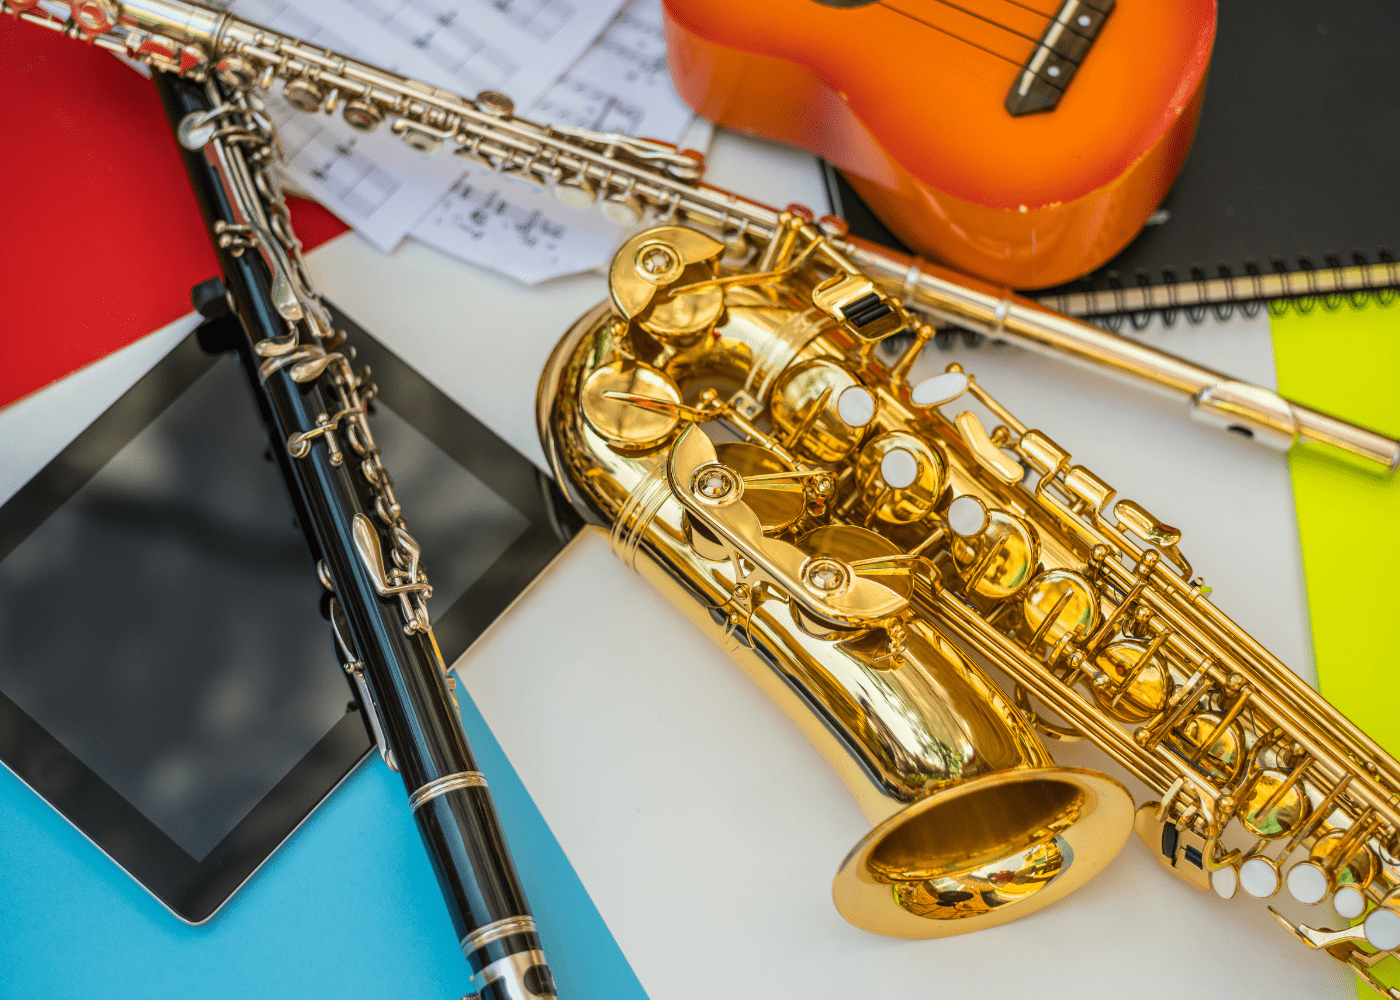 A collection of musical instruments, including a clarinet, saxophone, flute and ukulele.